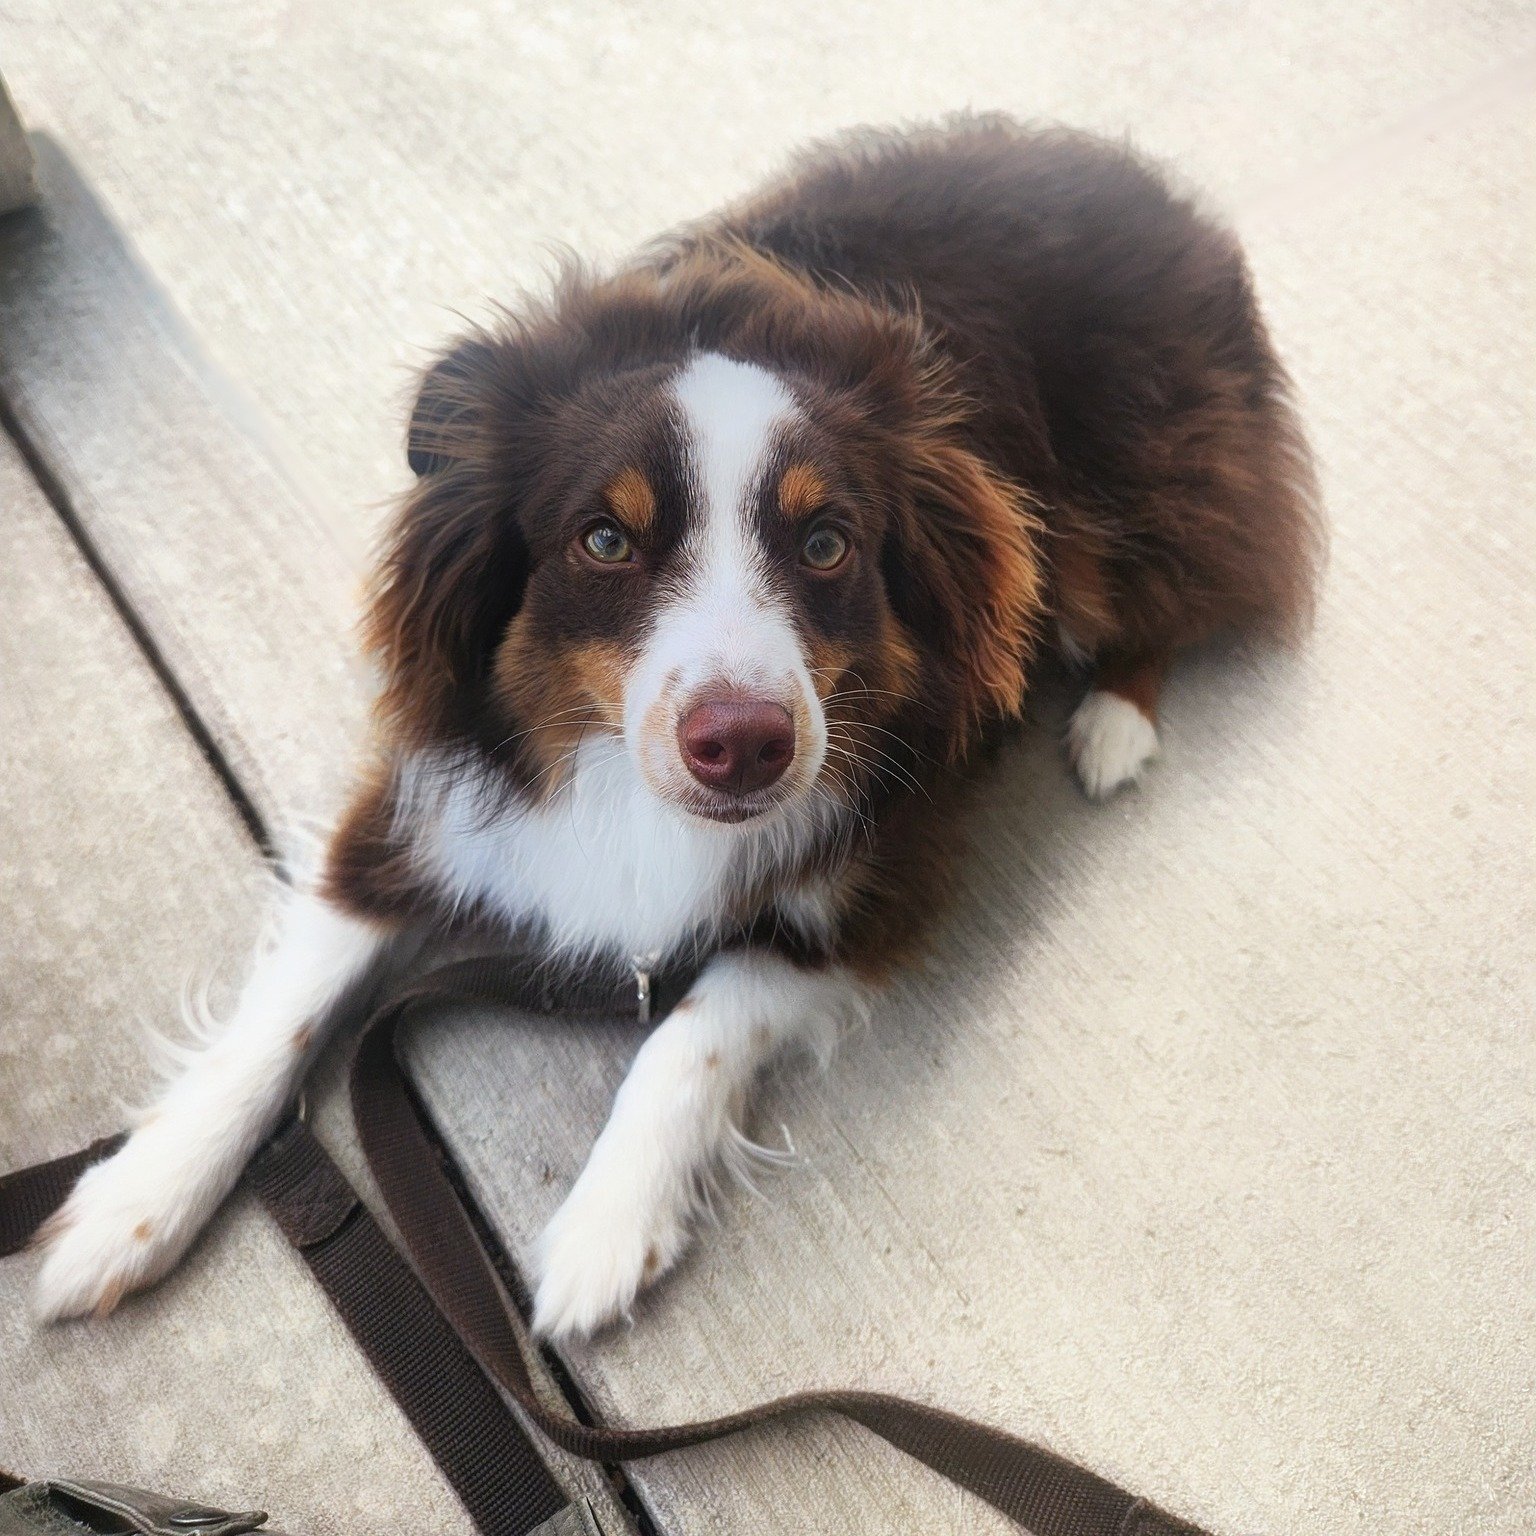 Welcome to Smart Walks, Milo!
Our newest pal in the Smart Walks program is this adorable Mini Aussie boy. His family has been diligent about his training, completing Puppy Kindergarten through Doggy High School with him! He can be a little unsure of 